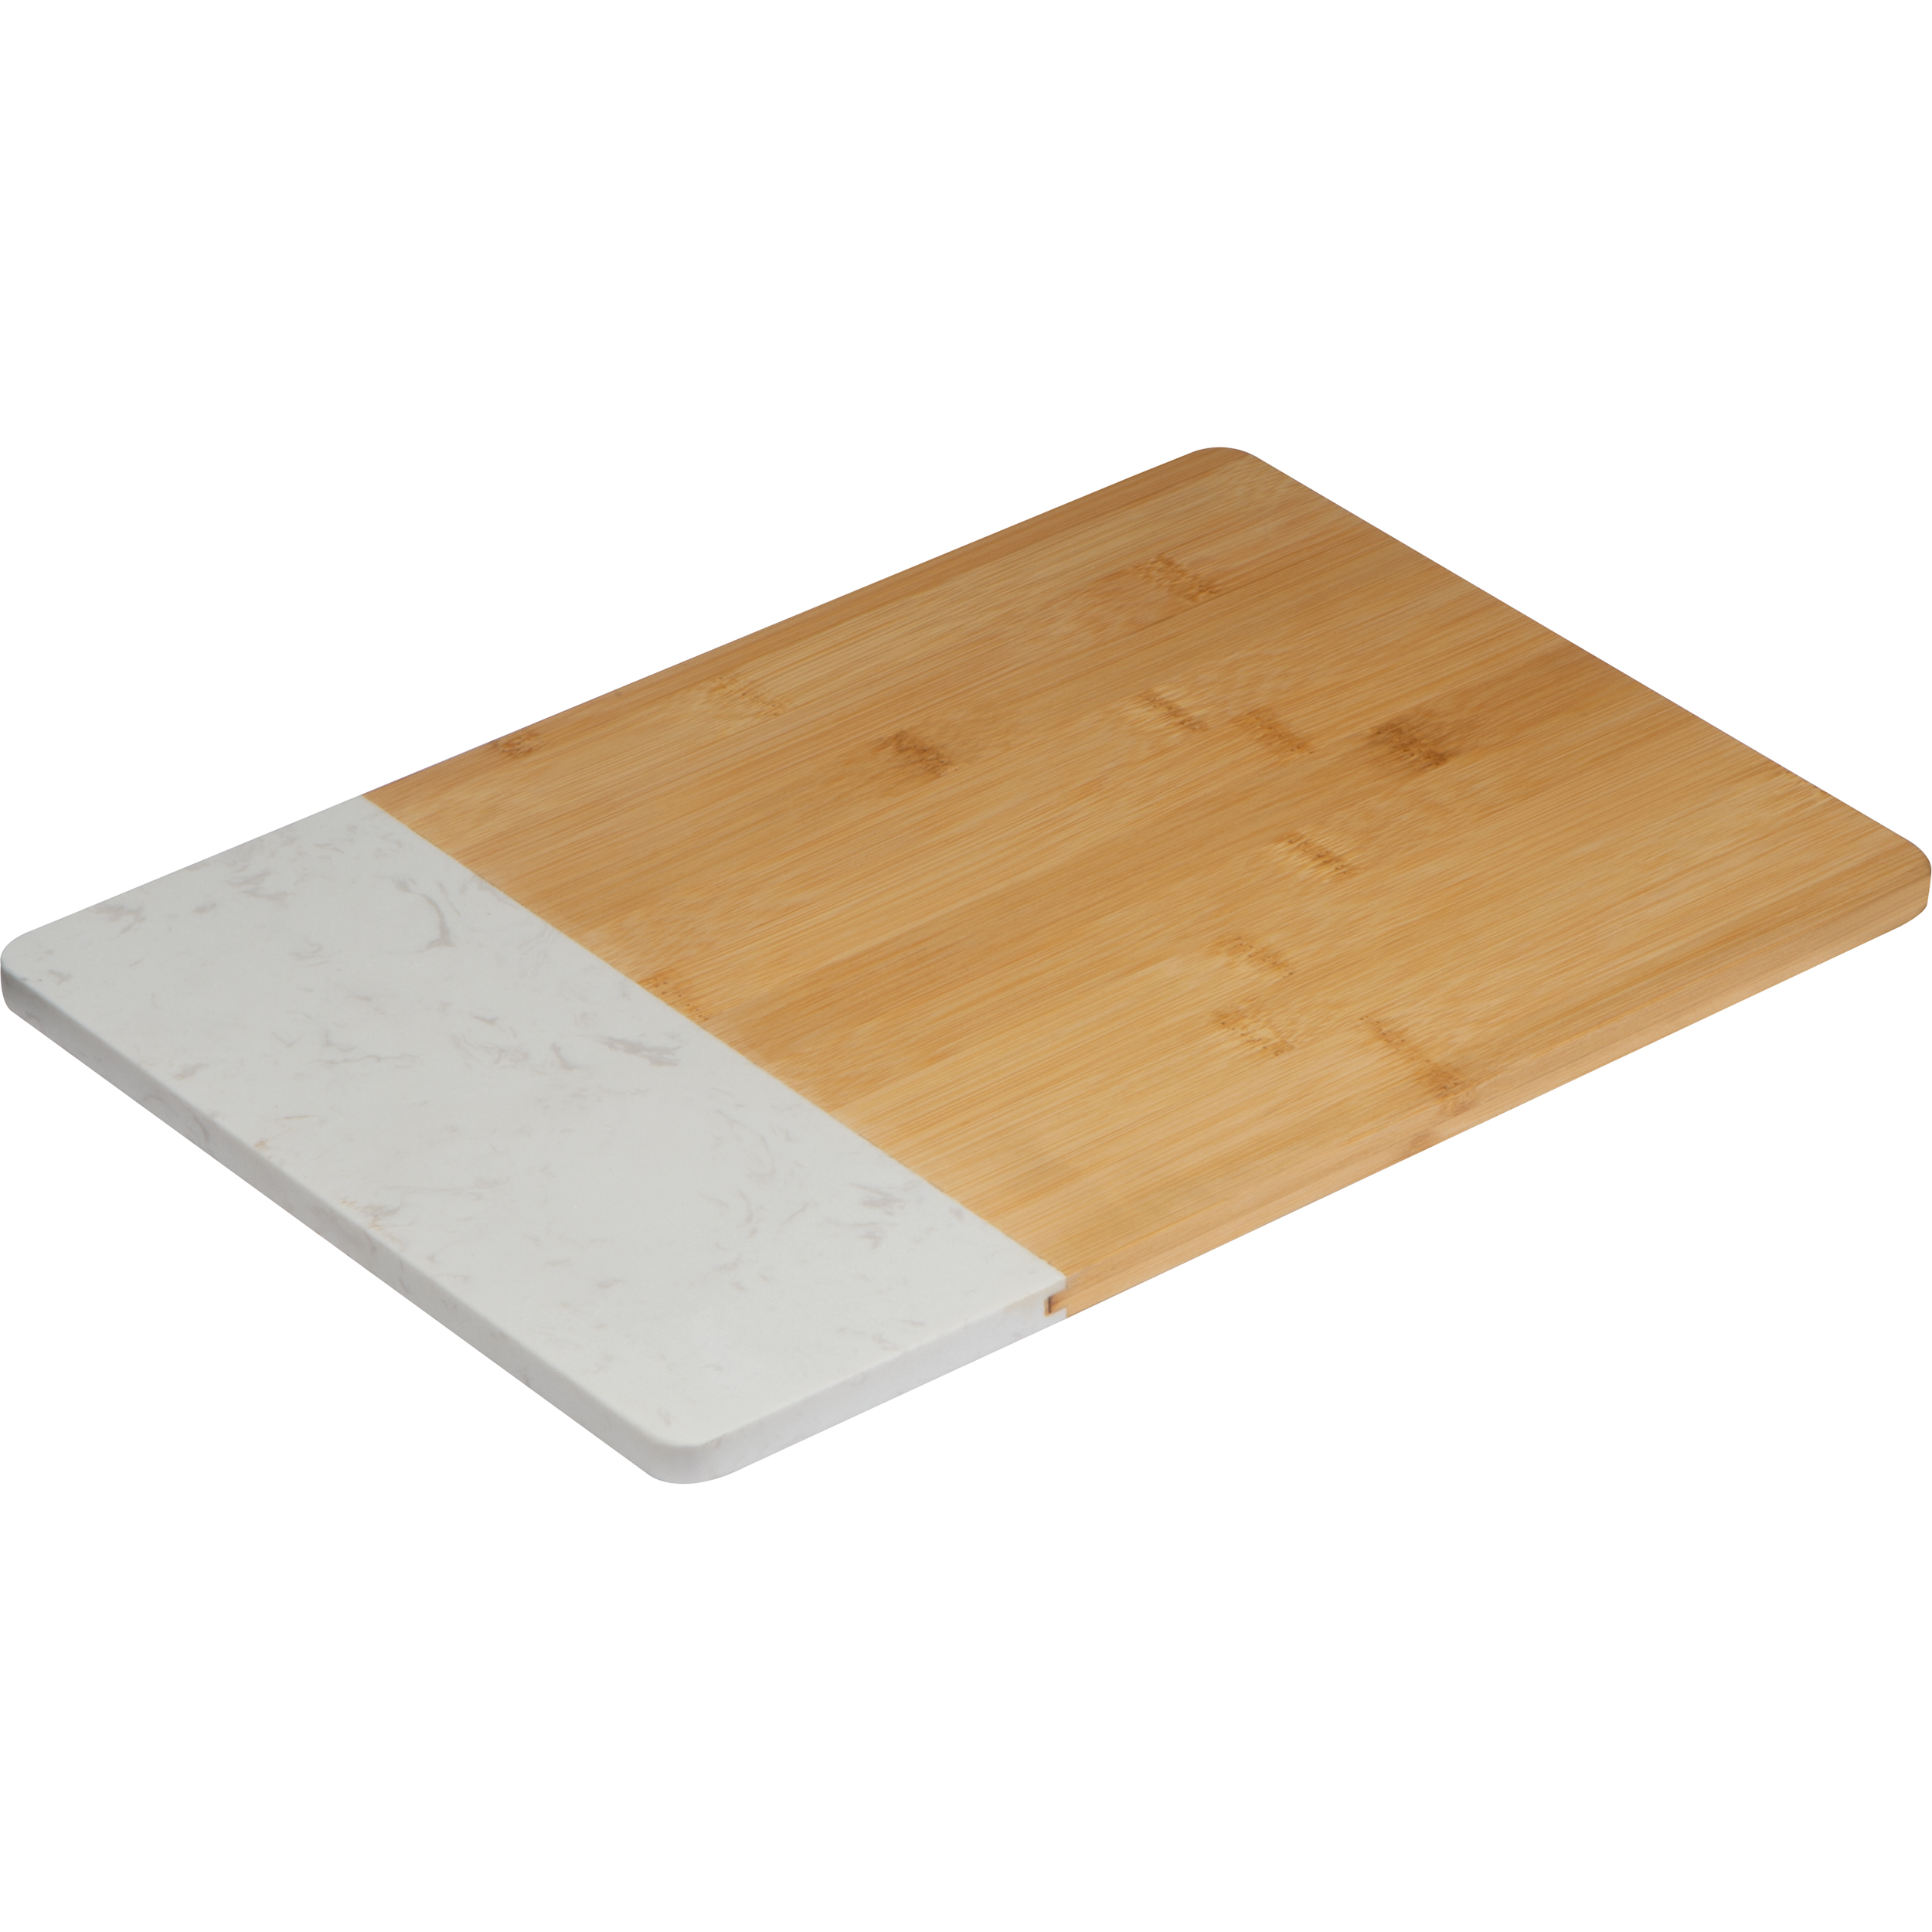 Middleham Engraved Marble Cutting Board made of Bamboo - Dartmouth